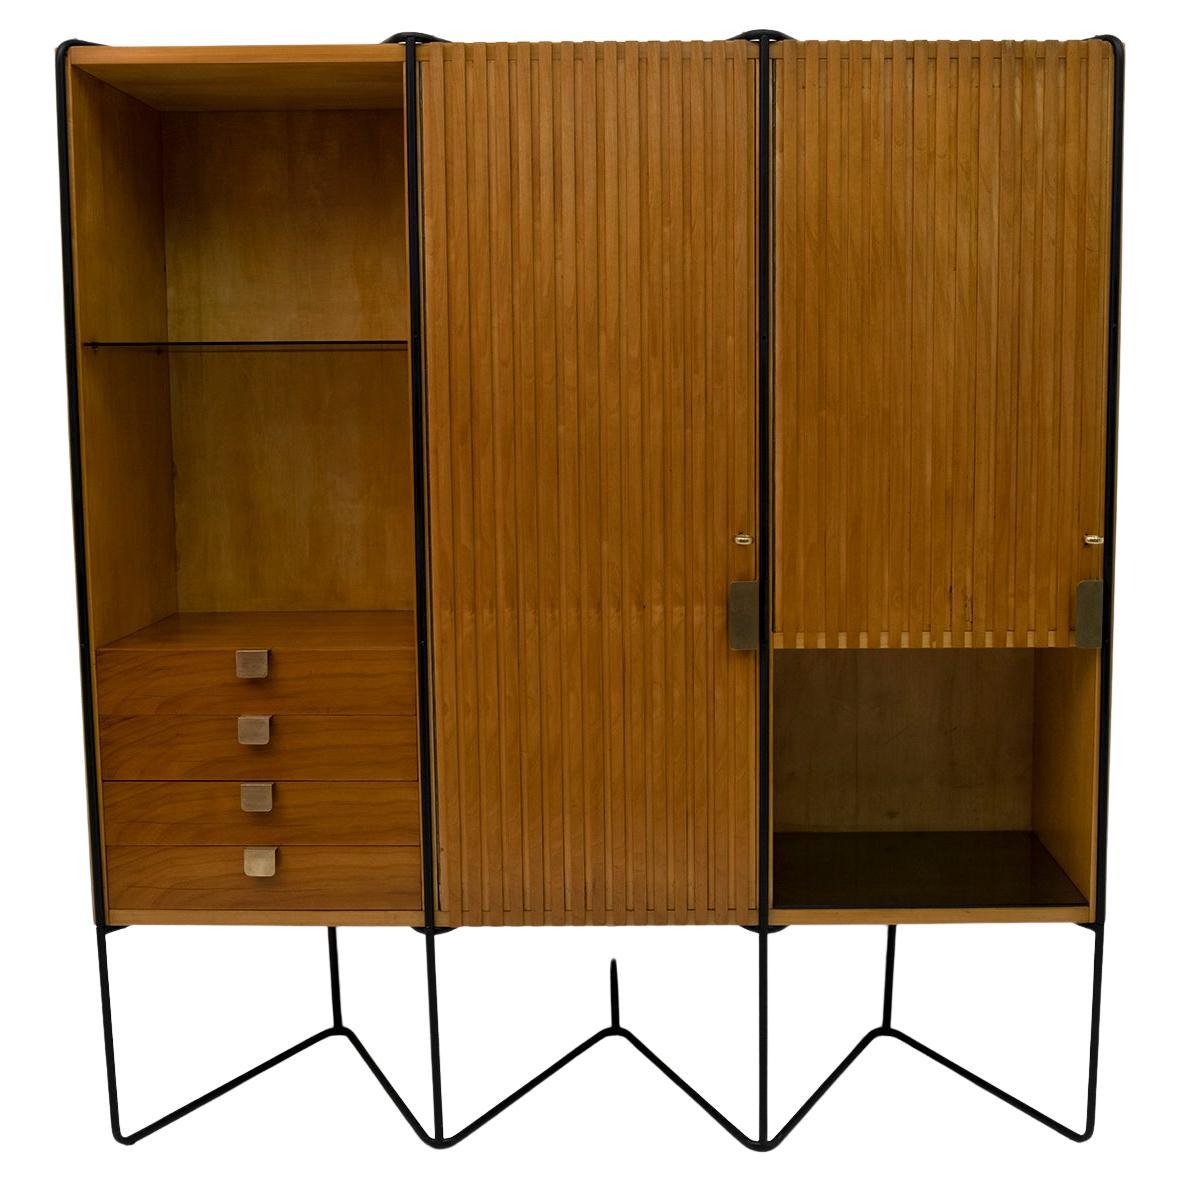 Modular bookcase with structure in lacquered metal and wood. Glass tops and brass details.
Produced by Consorzio la Permanente Mobili, Italy, 1953

Taichiro Nakai is an incredibly talented Japanese designer, best known for his participation in